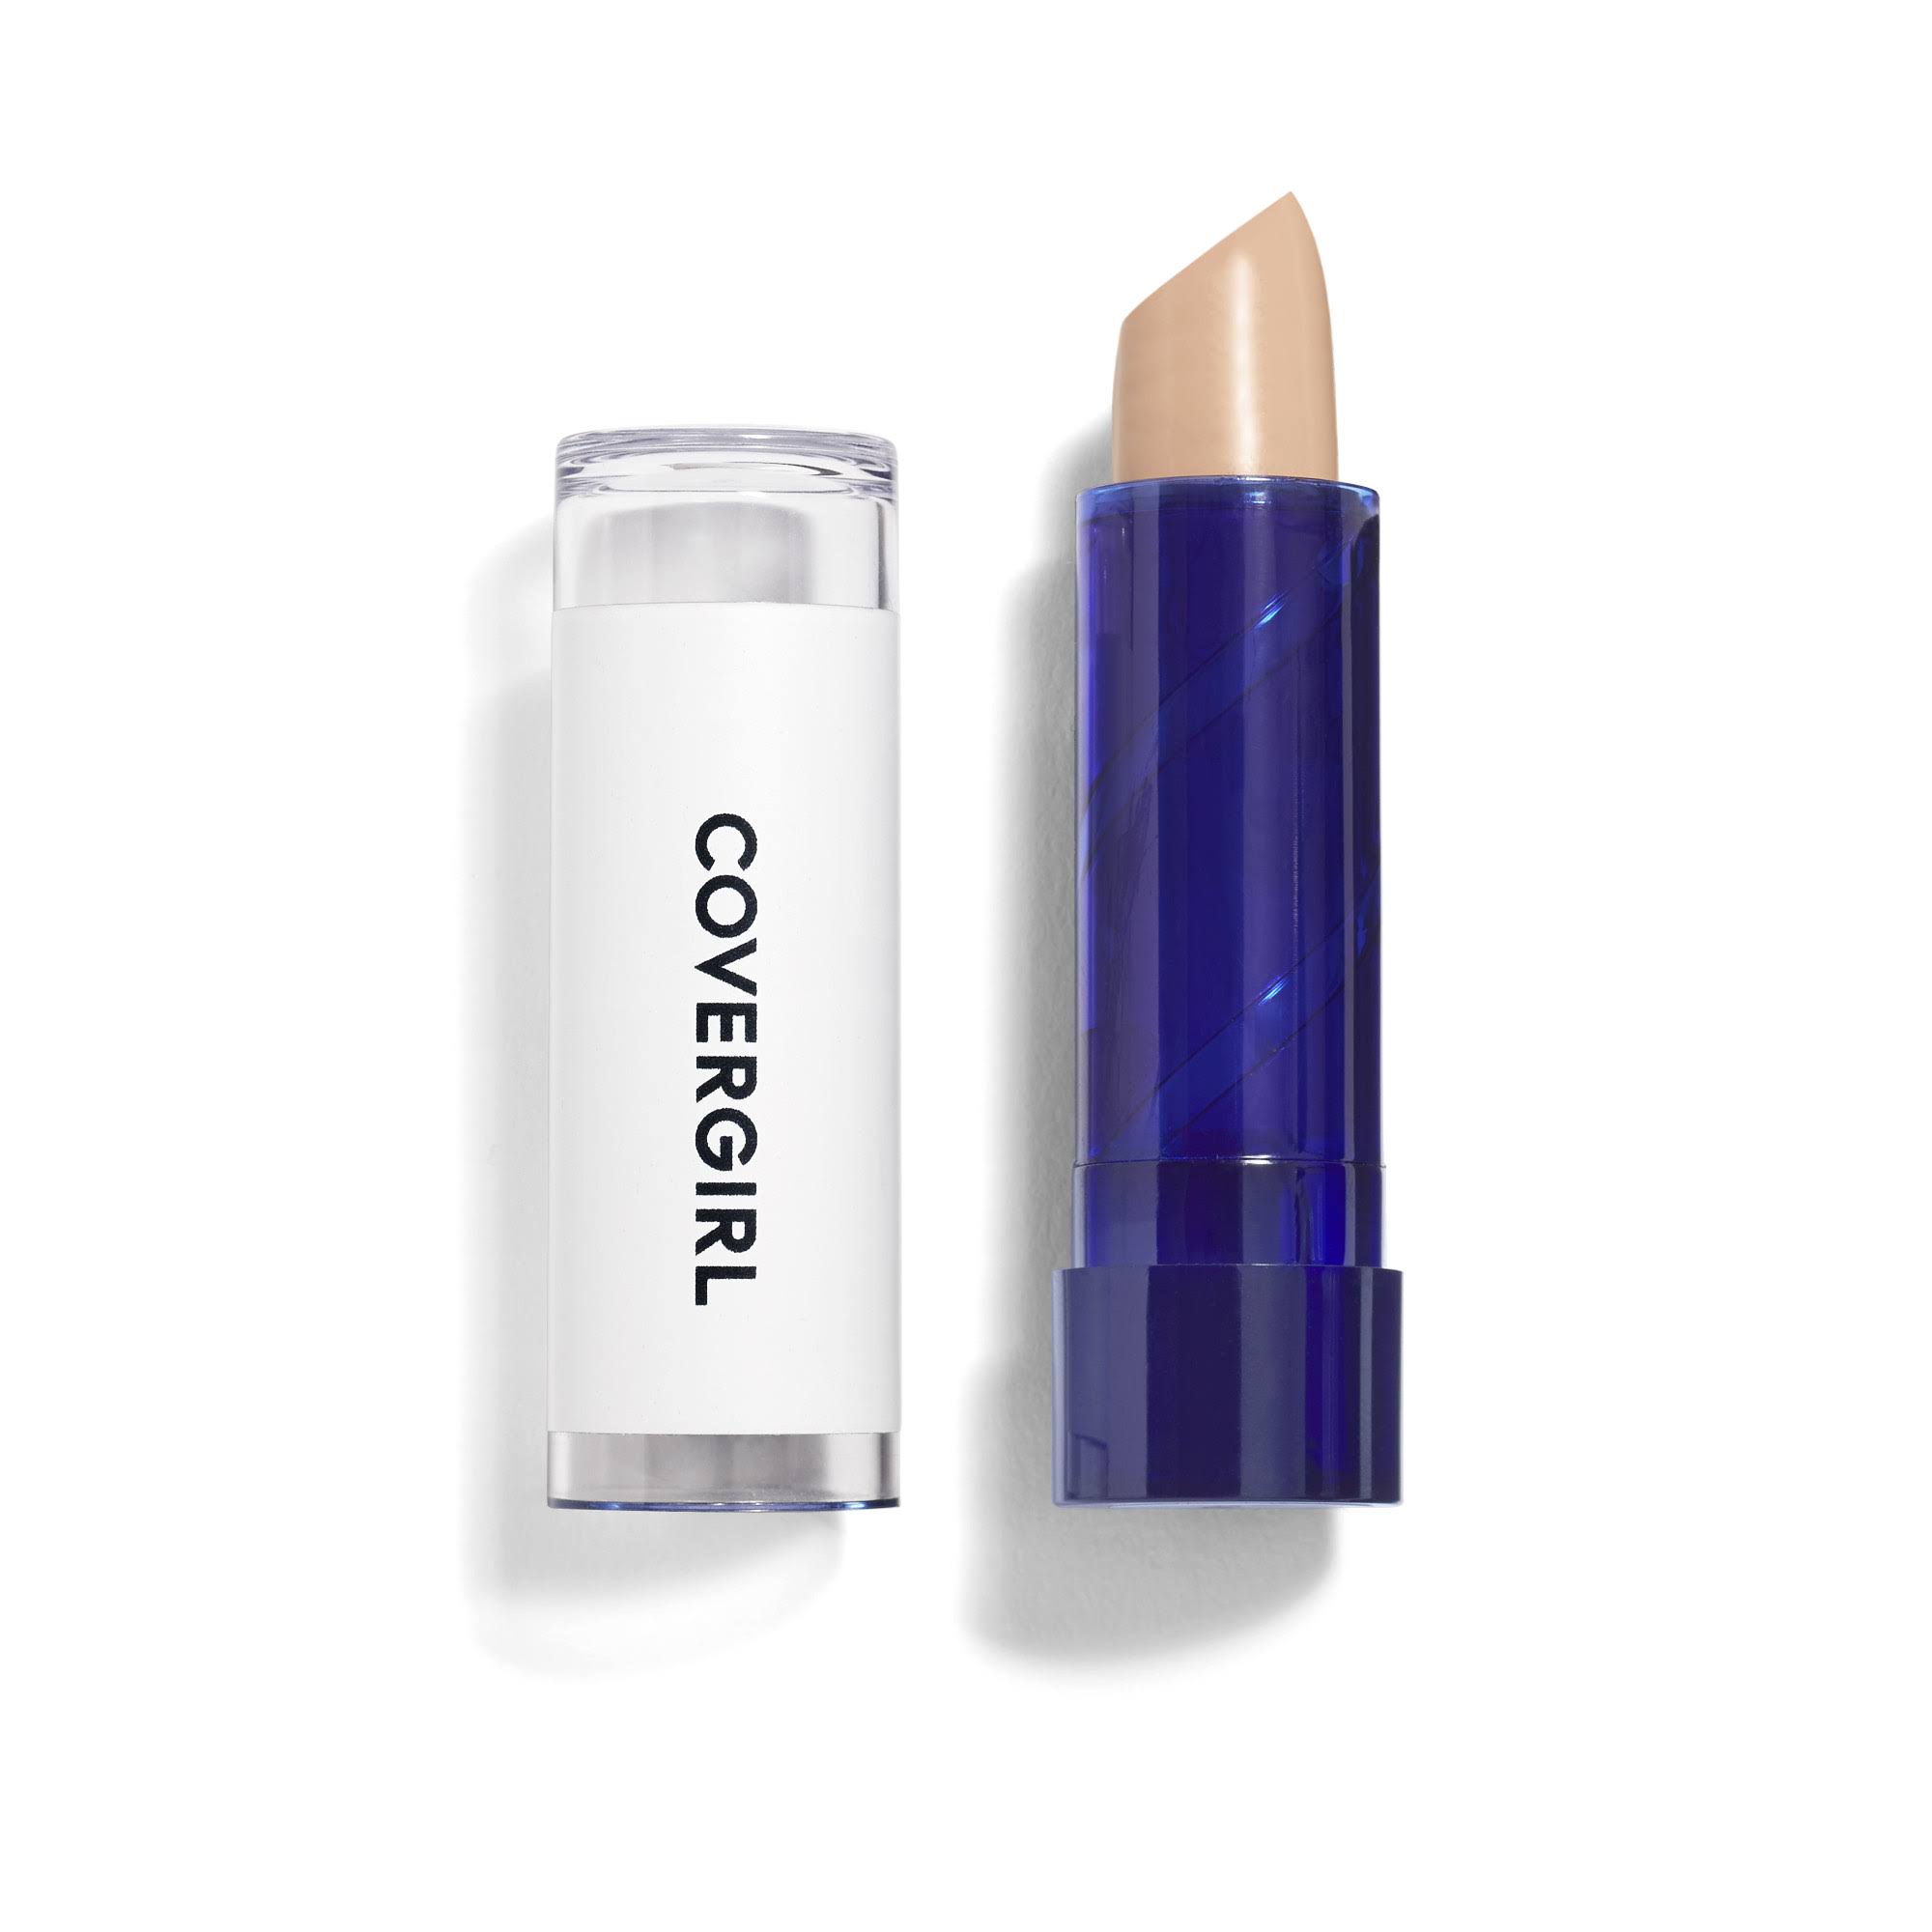 Covergirl CG Smoothers Concealer - 710 Light